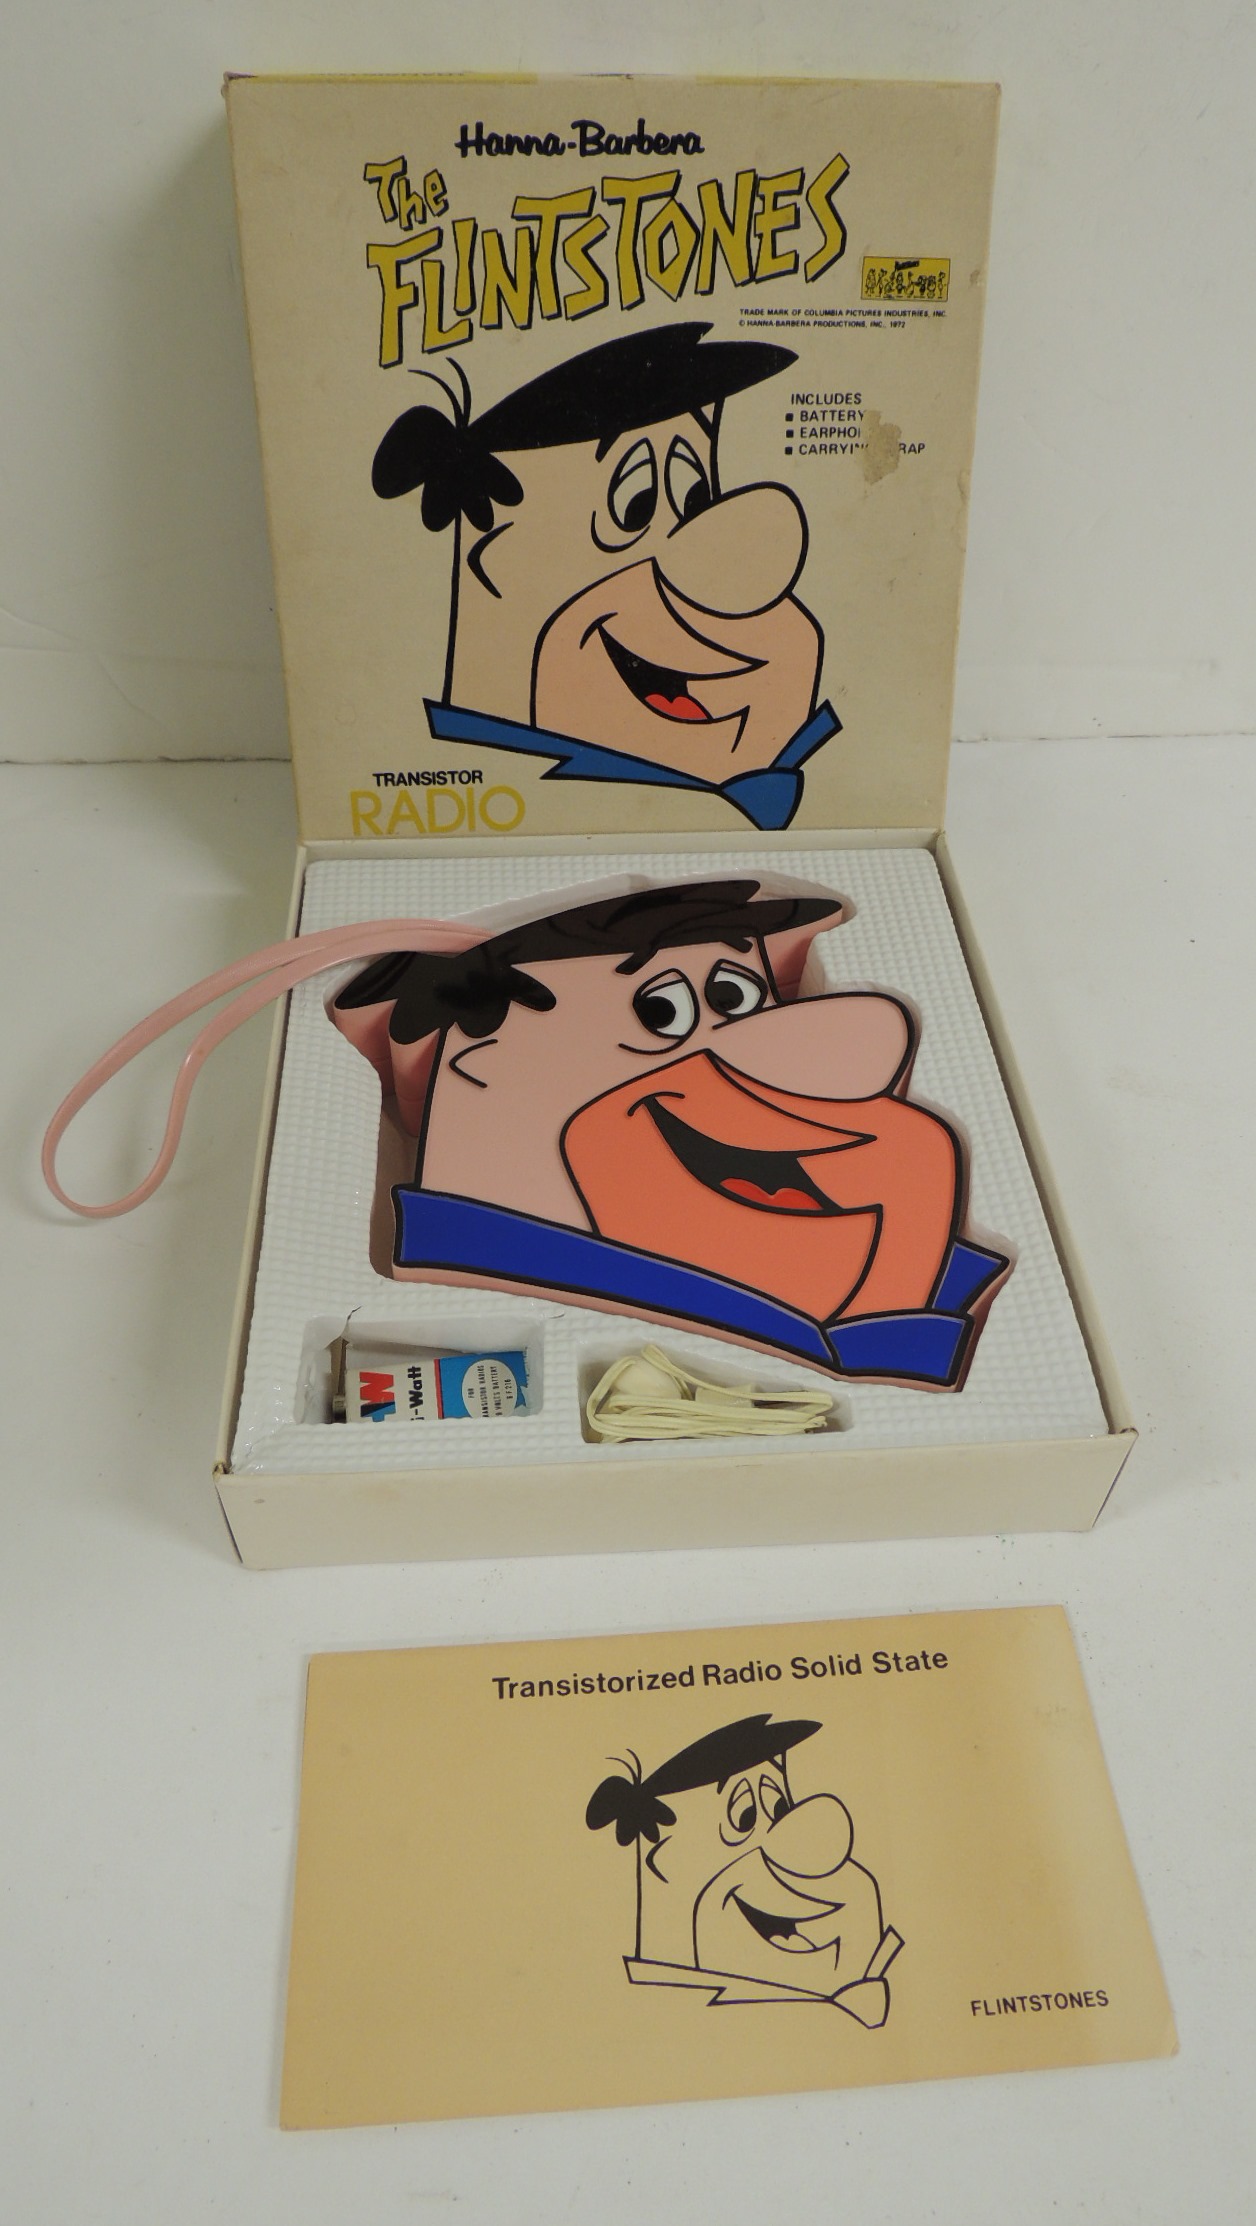 The Flintstones - a Solid State transistor radio in the form of Fred Flintstone in original box with